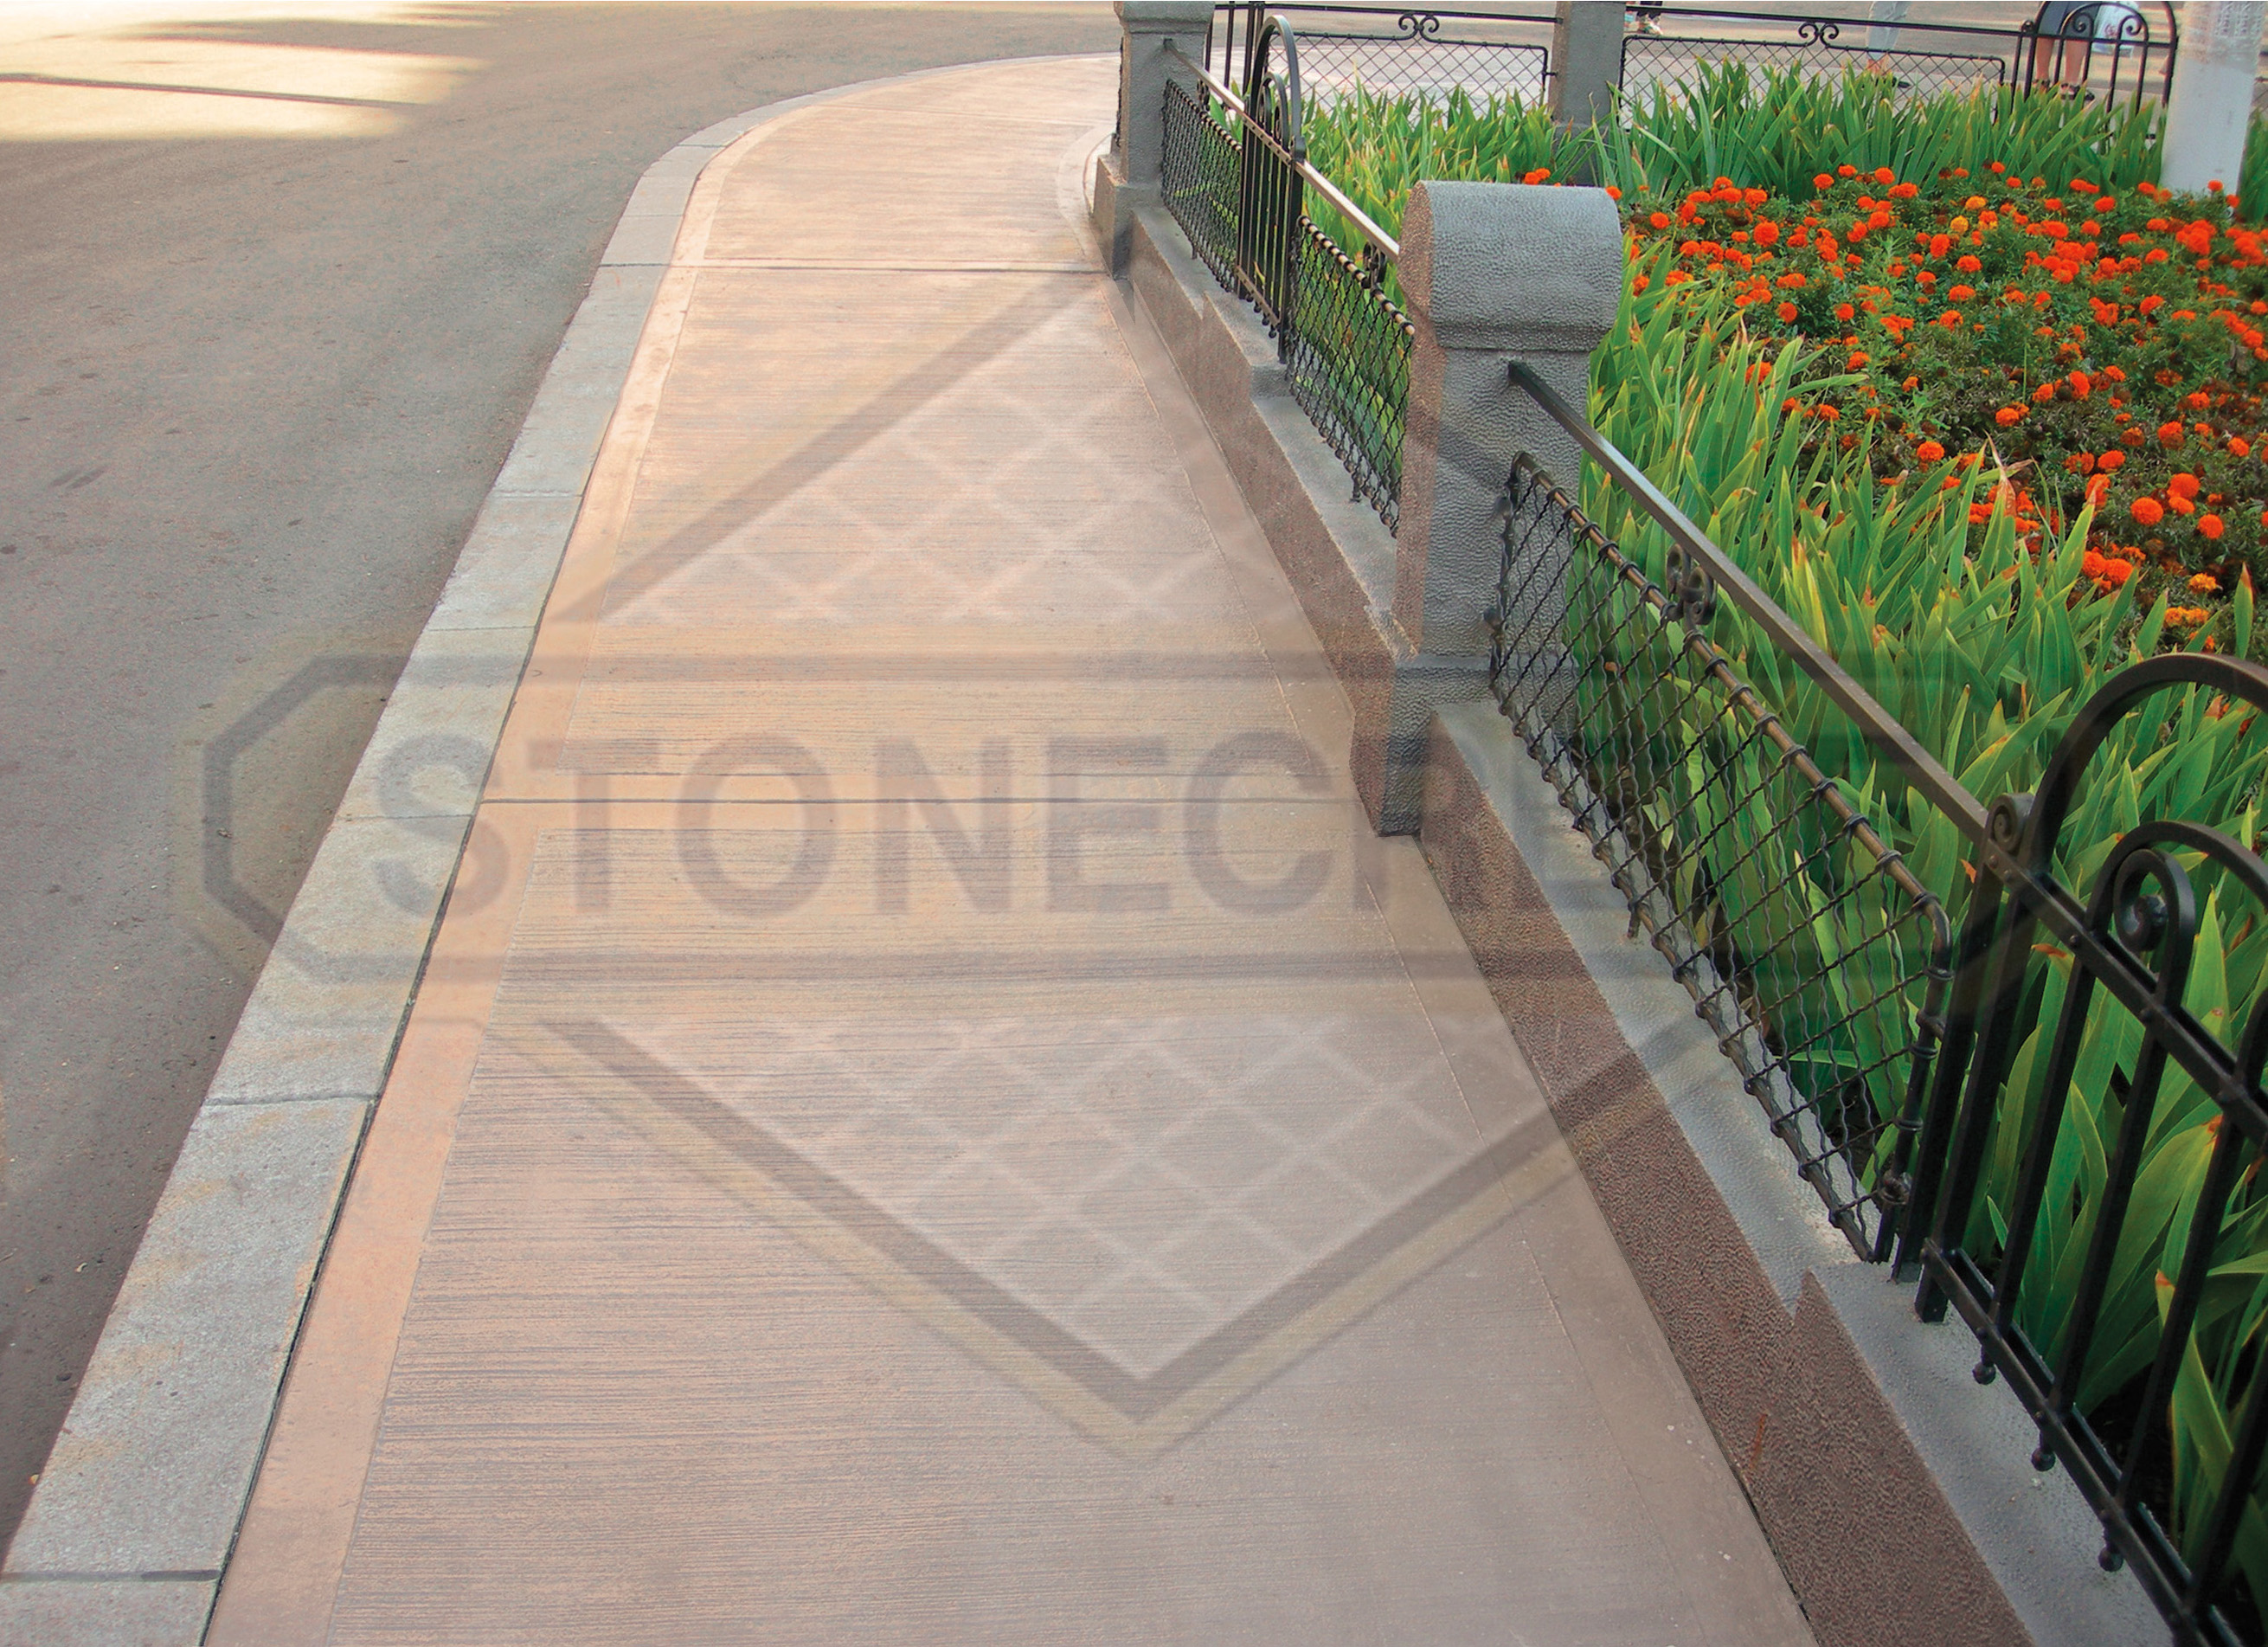 STONECRETE COMBED FLOORING, FOR NON-SKIDDING QUALITIES WITHOUT HARSH TEXTURE. IT IS CONSTRUCTED ON FRESH CONCRETE WITH STONECRETE COLOUR HARDENERS AND GIVEN TEXTURE WITH METALLIC TOOLS